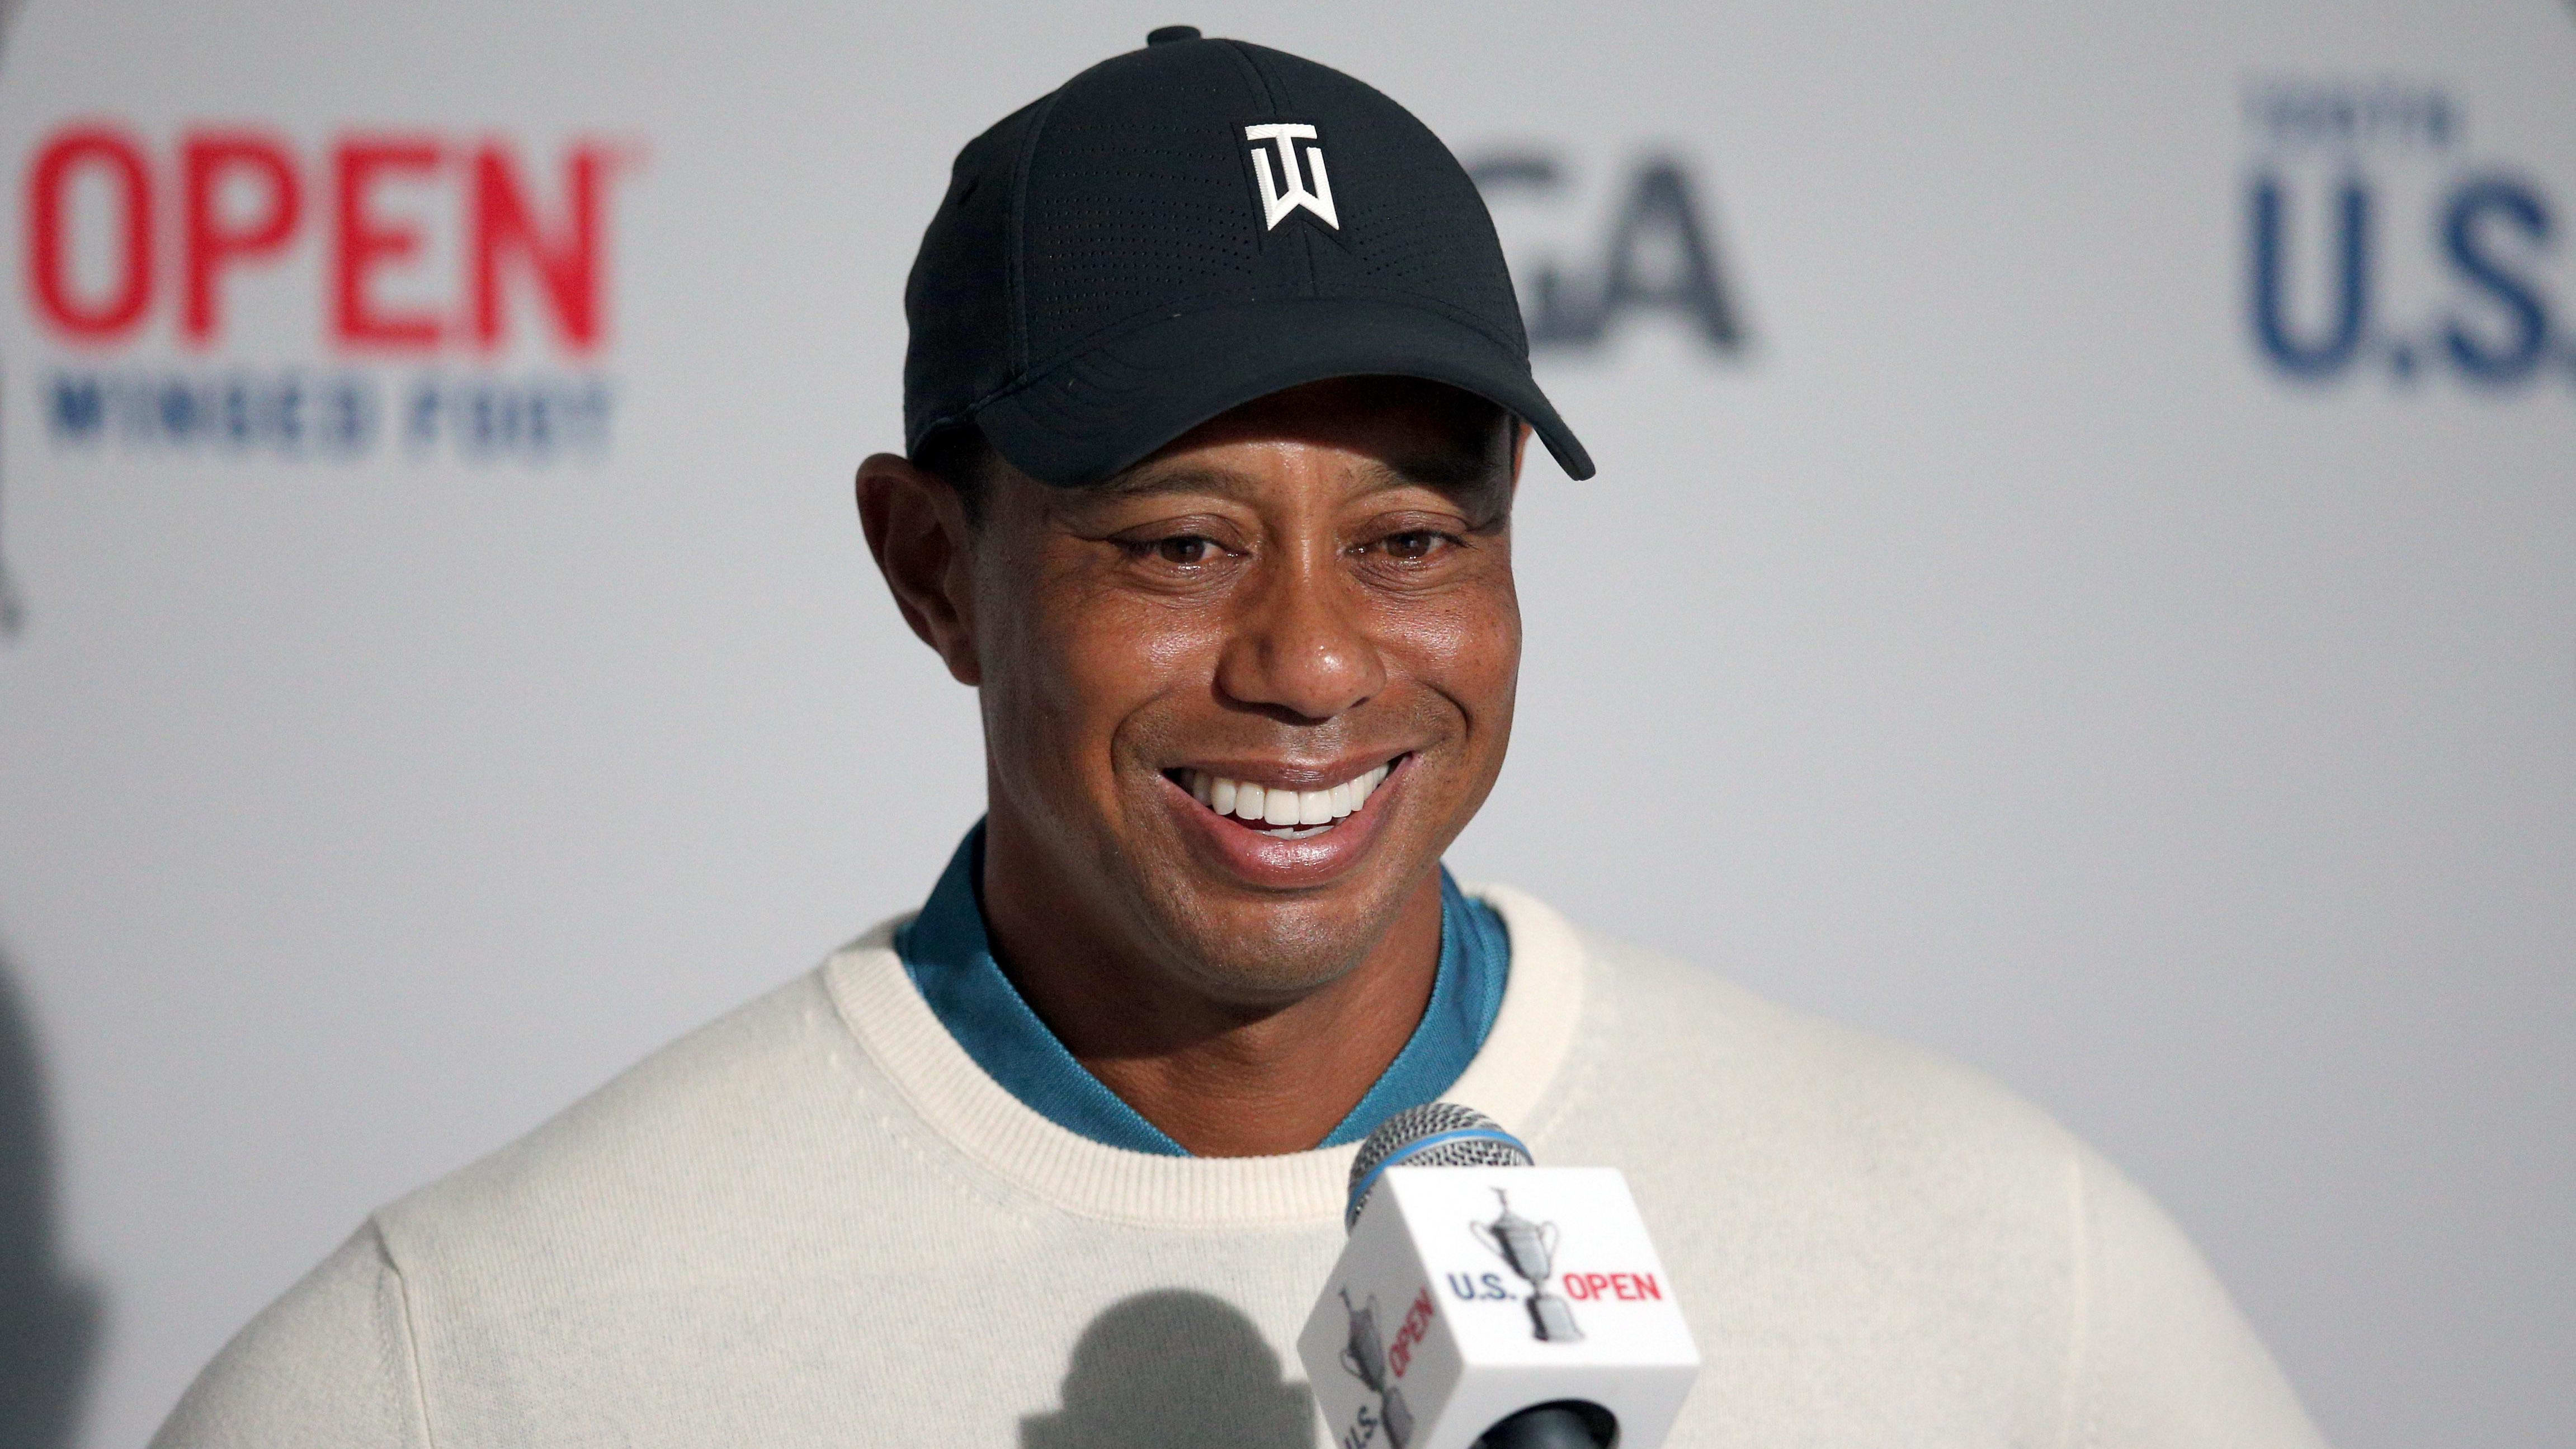 Tiger Woods talks to reporters following his second round at the 2020 U.S. Open.